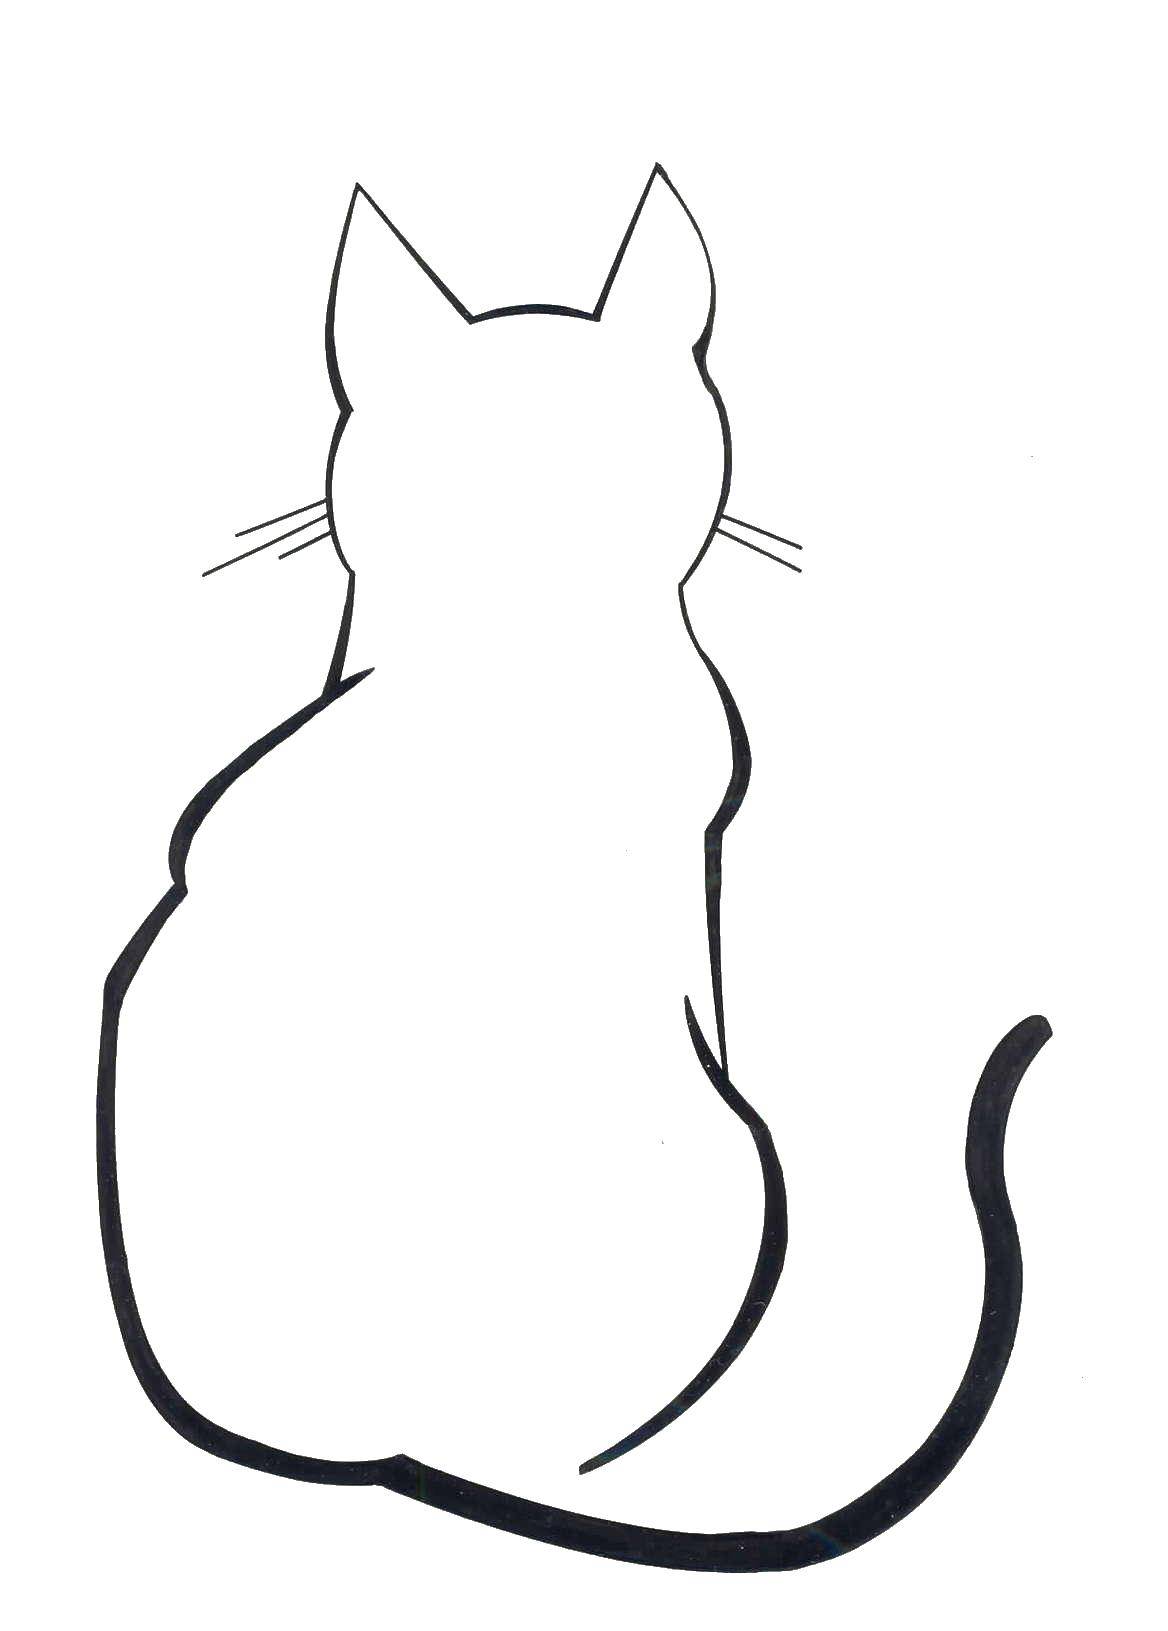 Coloring Contour cats. Category The contour of the cat to cut. Tags:  contour , cat, tail.